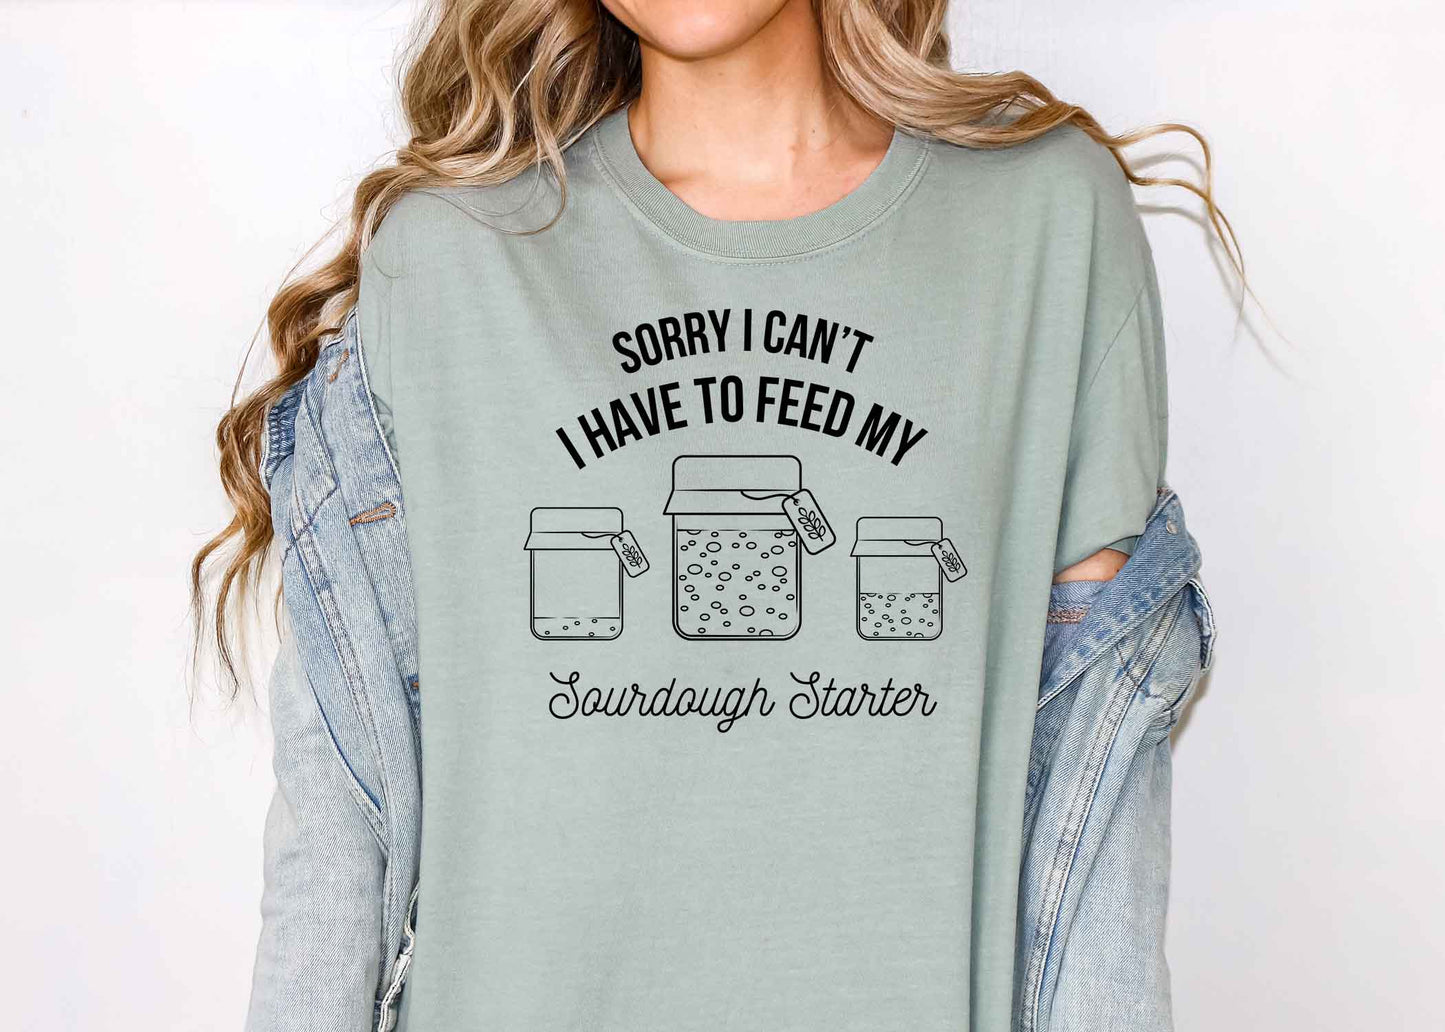 Sorry I can’t I have to feed my sourdough starter shirt